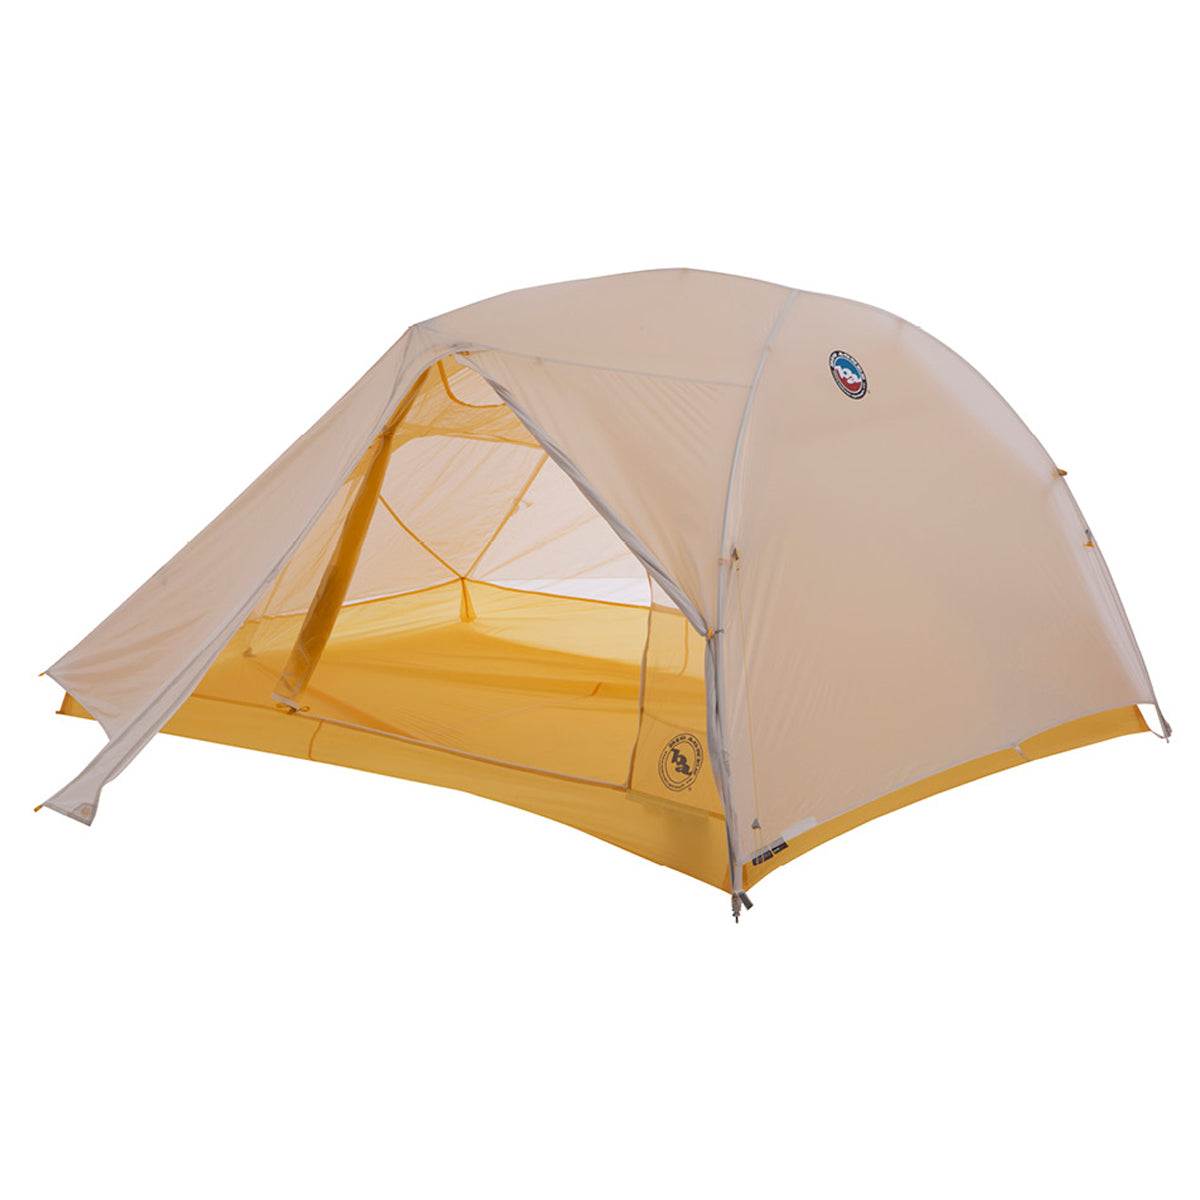 Big Agnes Tiger Wall UL 3 Person Solution Dye Tent in  by GOHUNT | Big Agnes - GOHUNT Shop